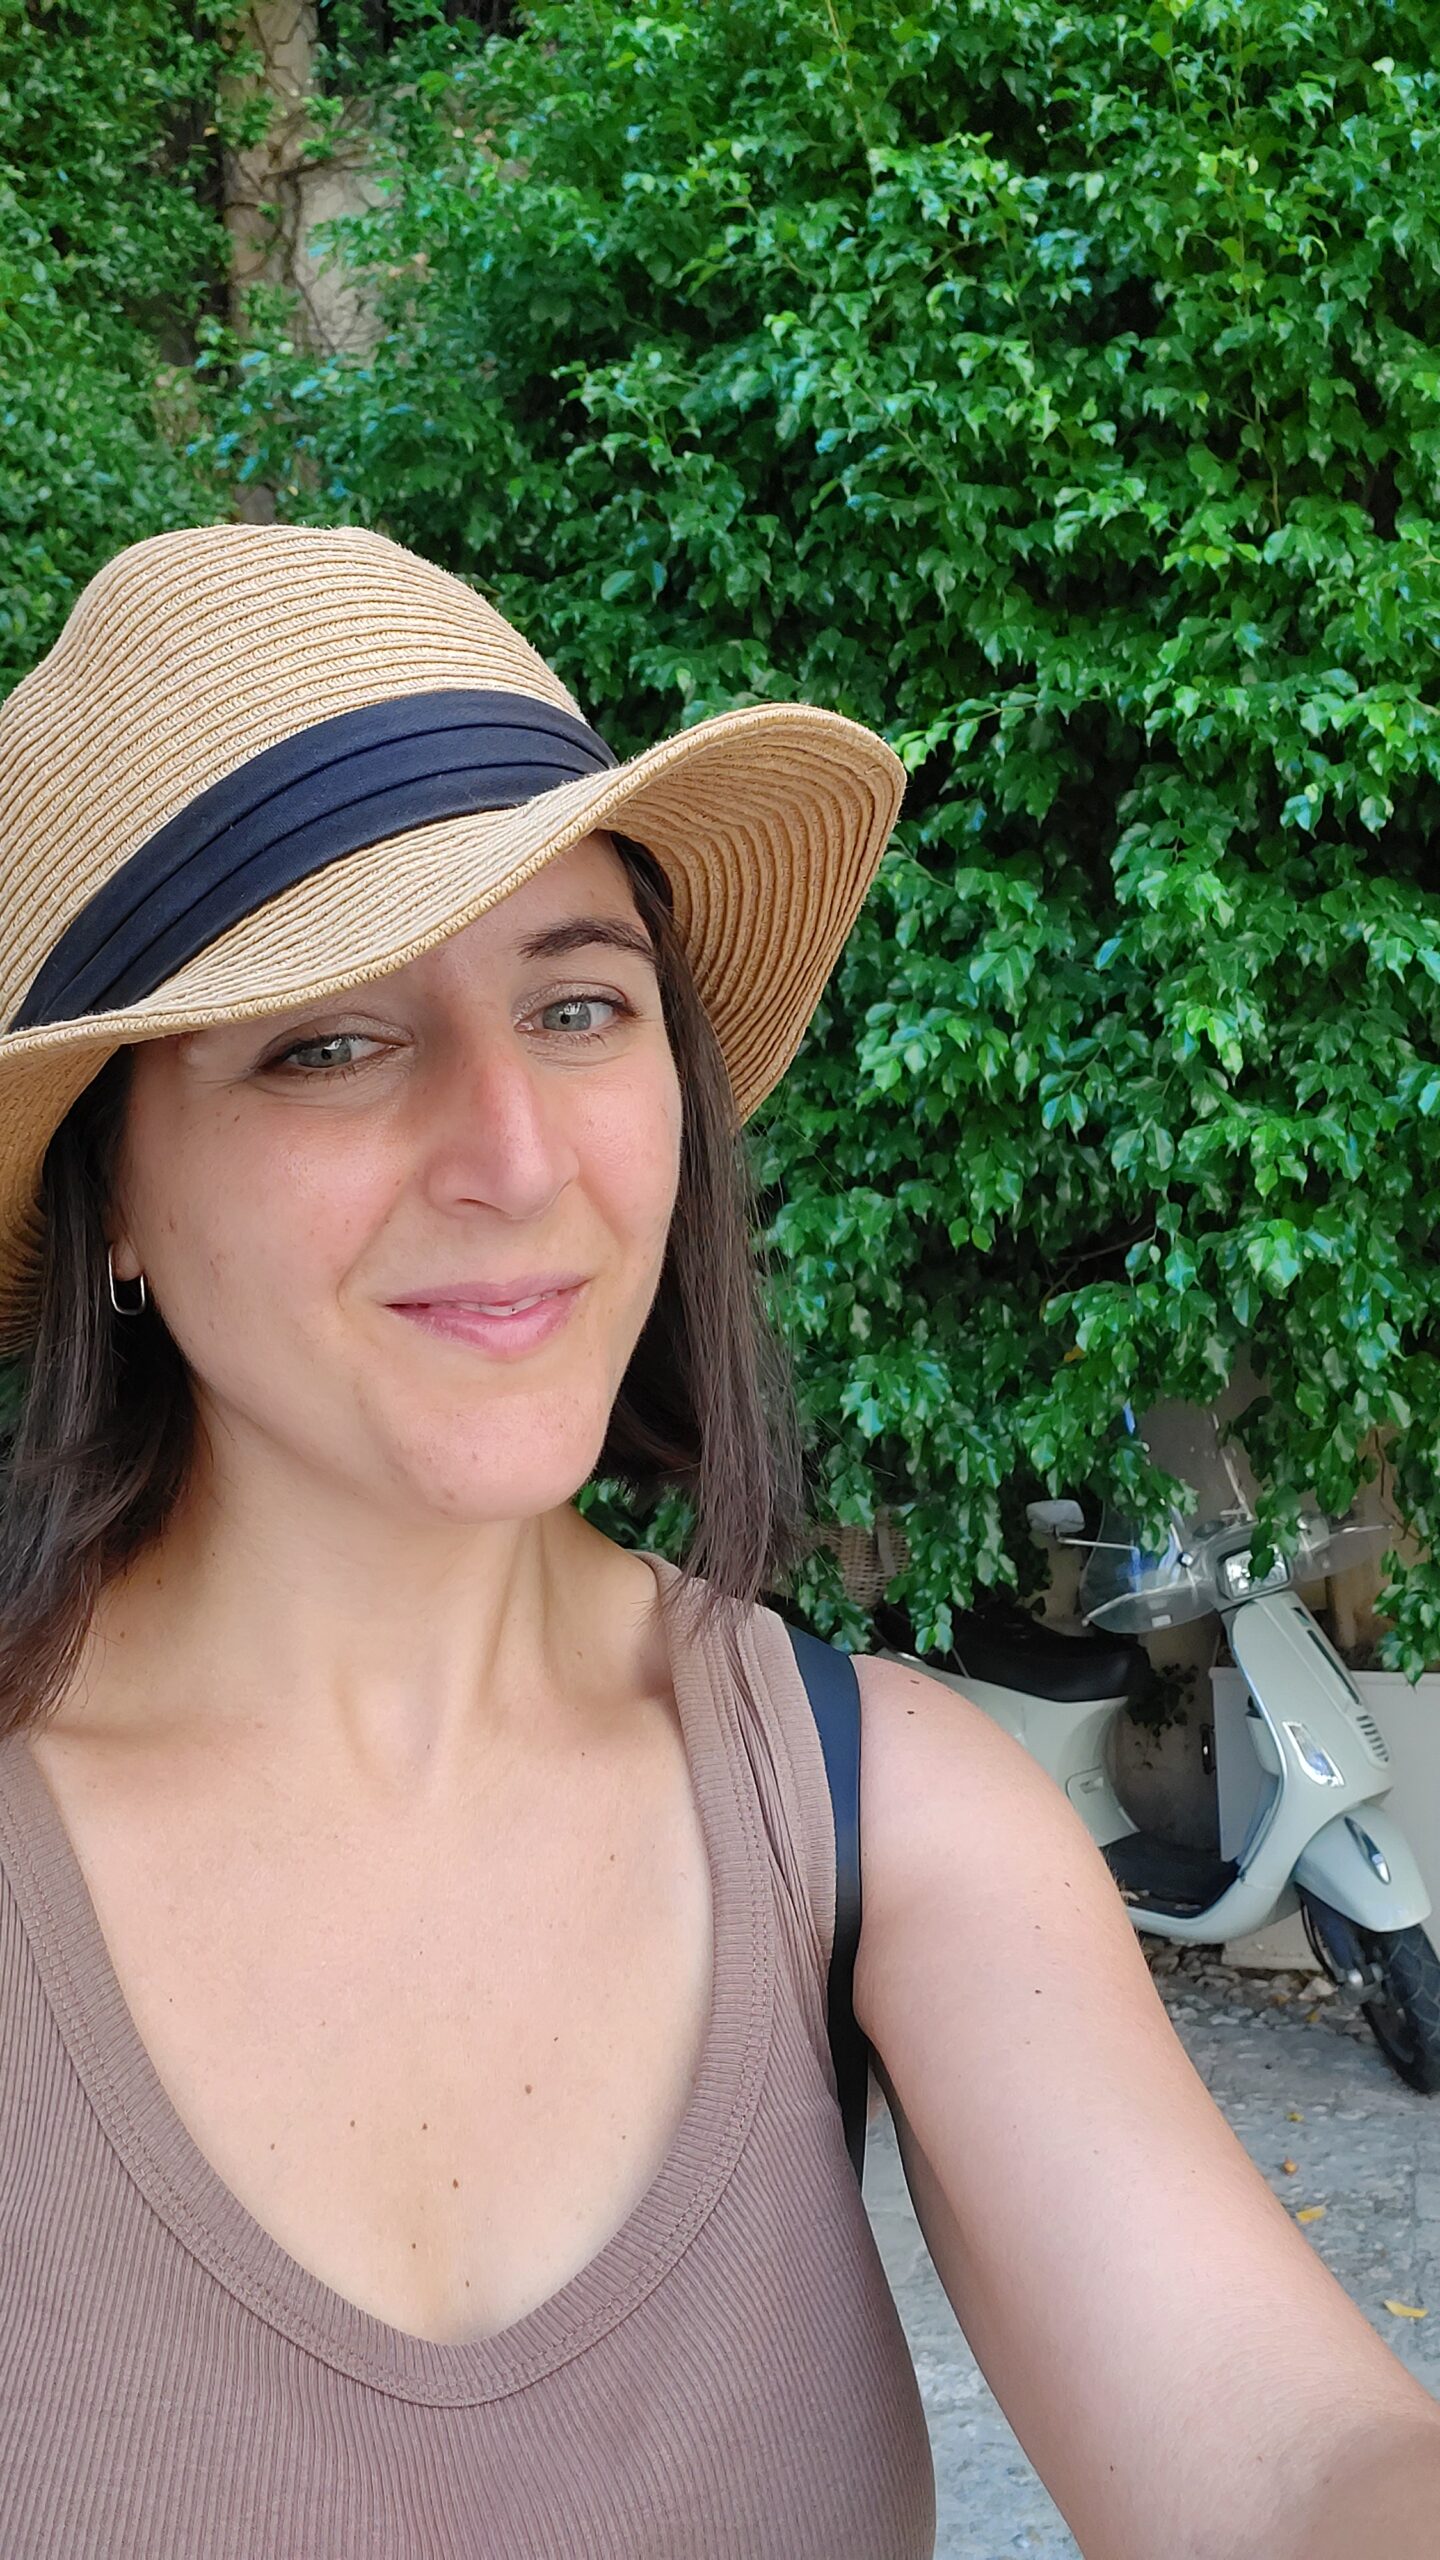 Francesca is smiling, wearing a hat, and standing in a leafy courtyard.